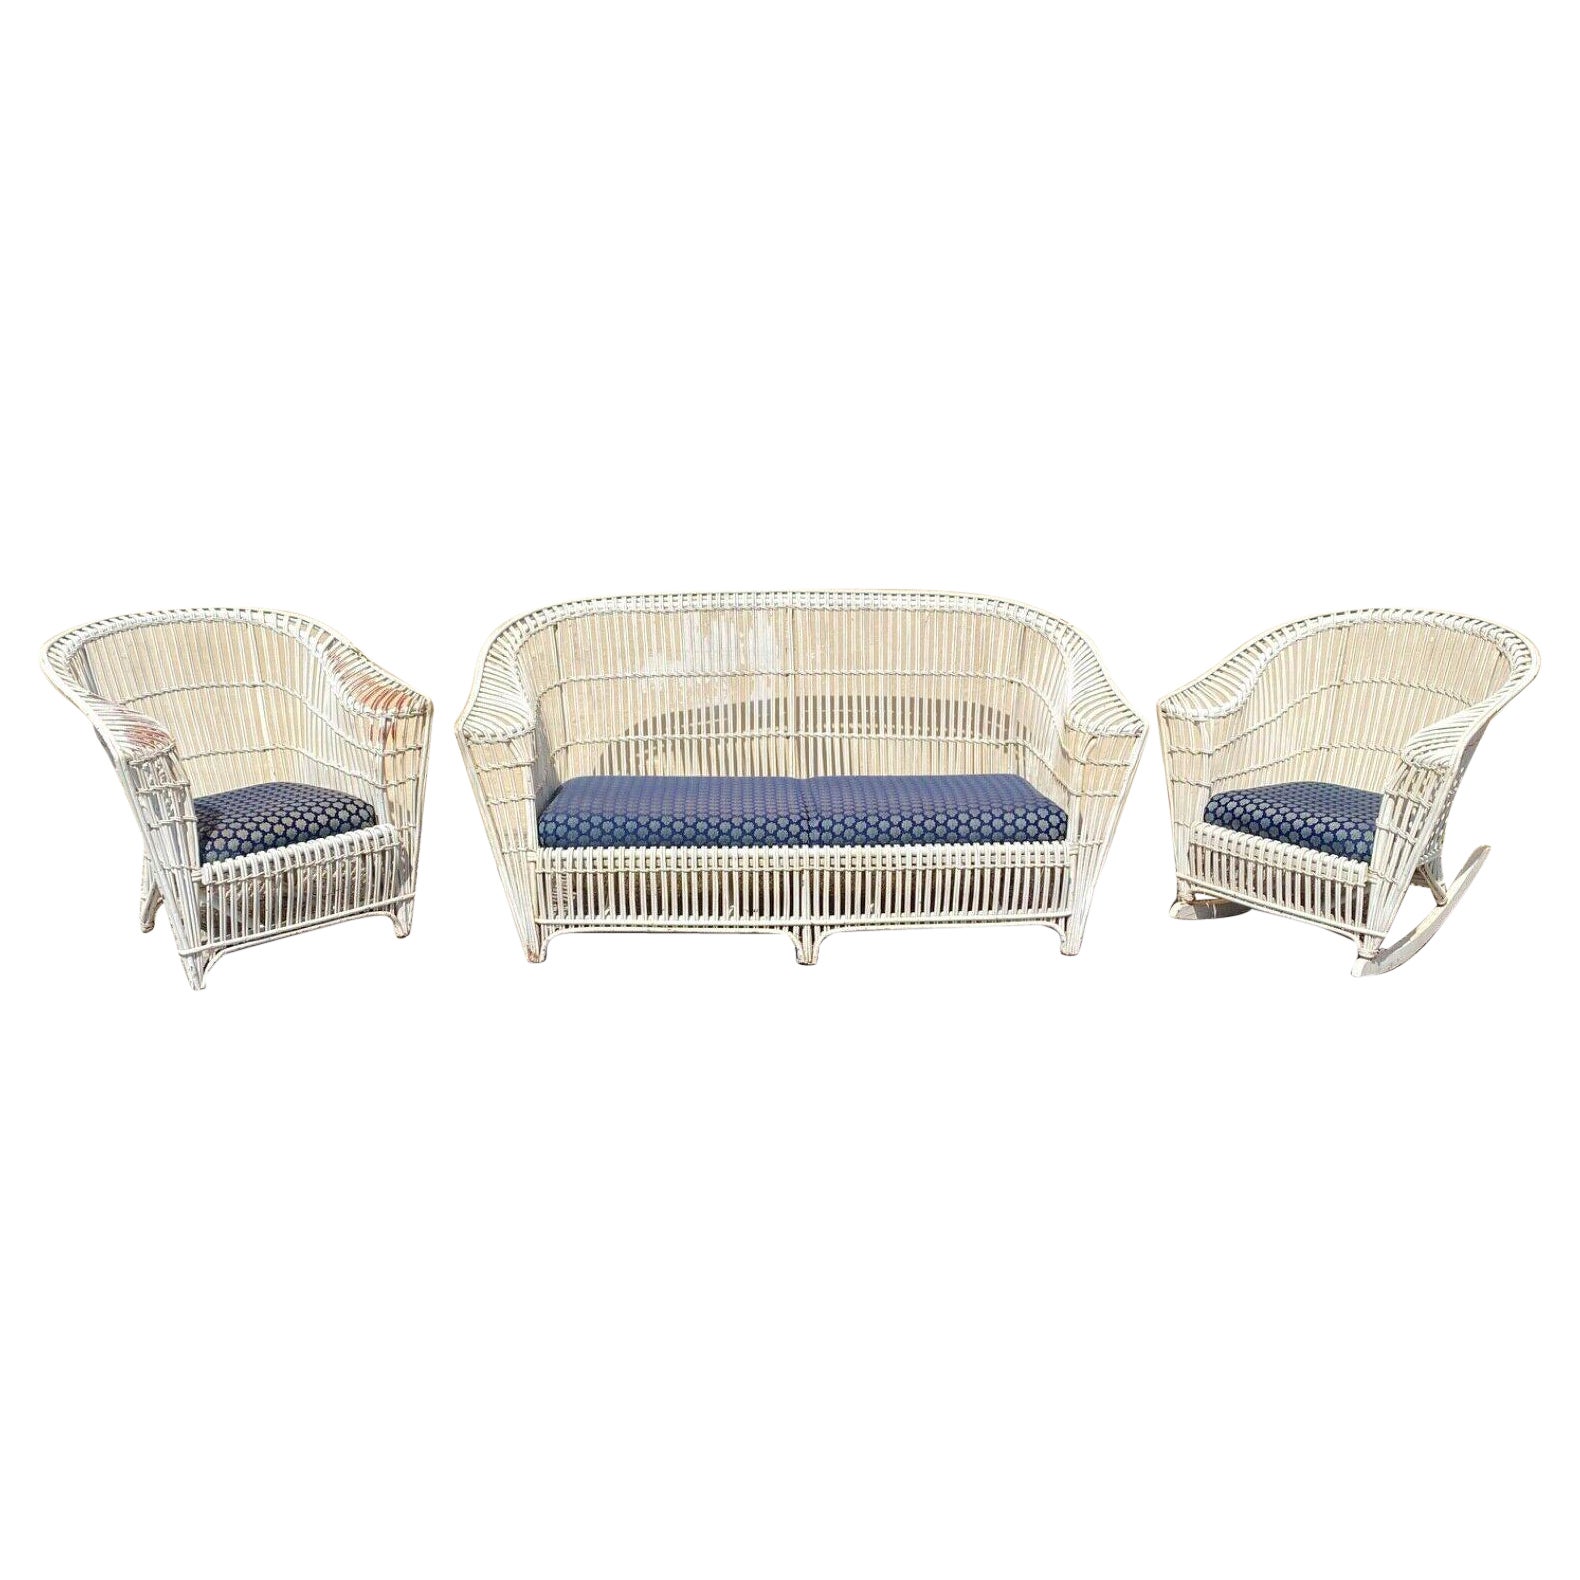 Antique Victorian Wicker Rattan Bentwood Sculptural Sunroom Sofa Set with Chairs For Sale